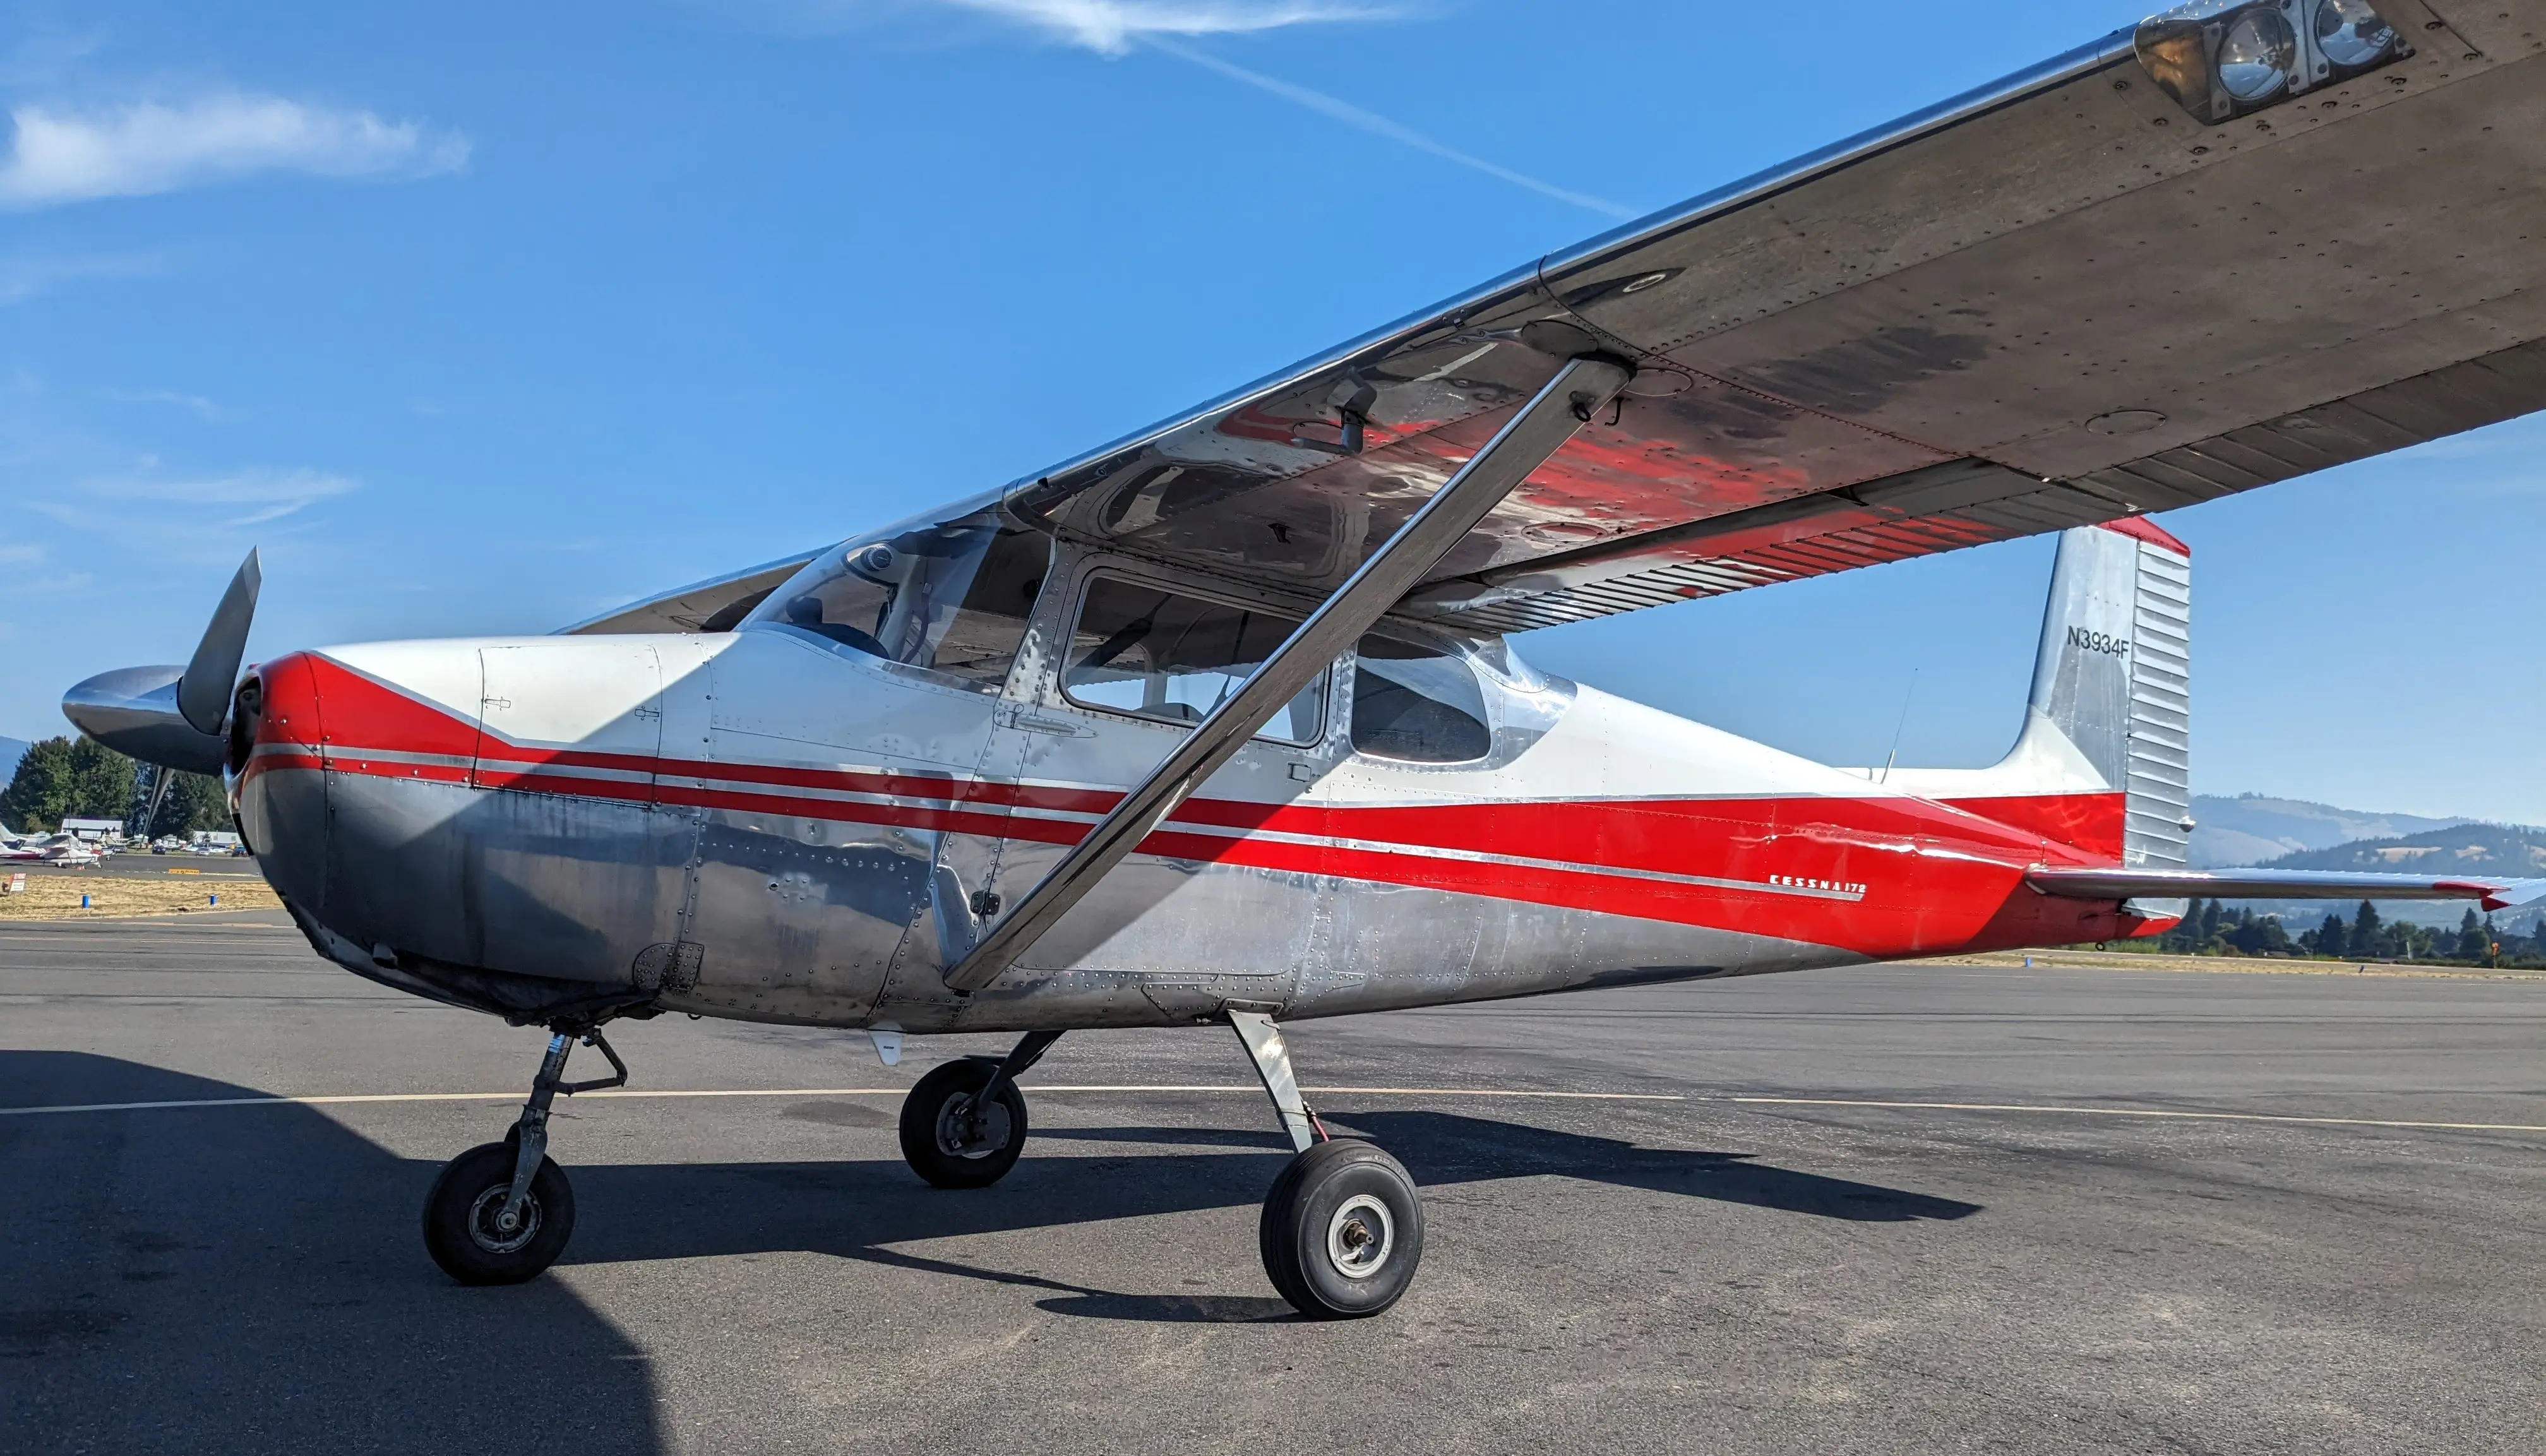 GWA's Cessna 172, parked at the Hood River airport. It is a silver airplane with bright red detailing.